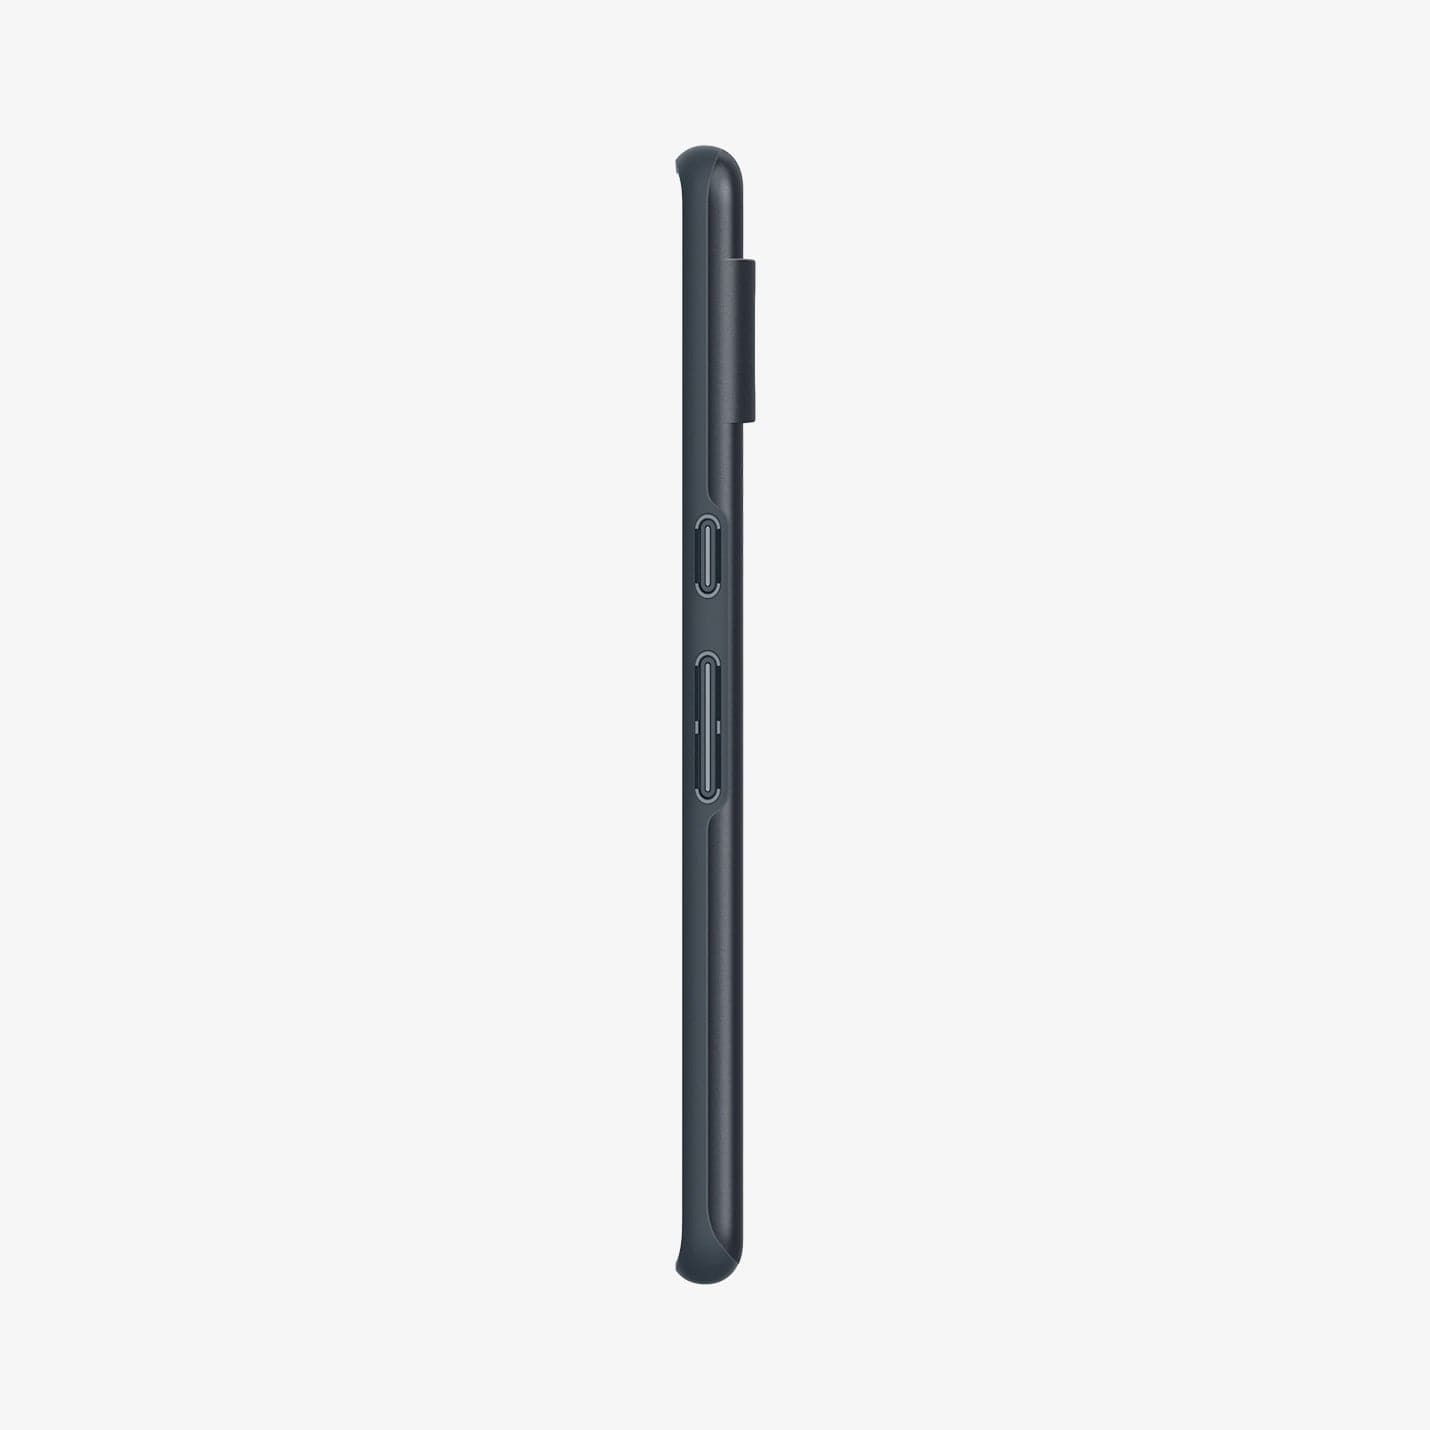 ACS04734 - Pixel 7 Pro Case Thin Fit in metal slate showing the side with volume controls